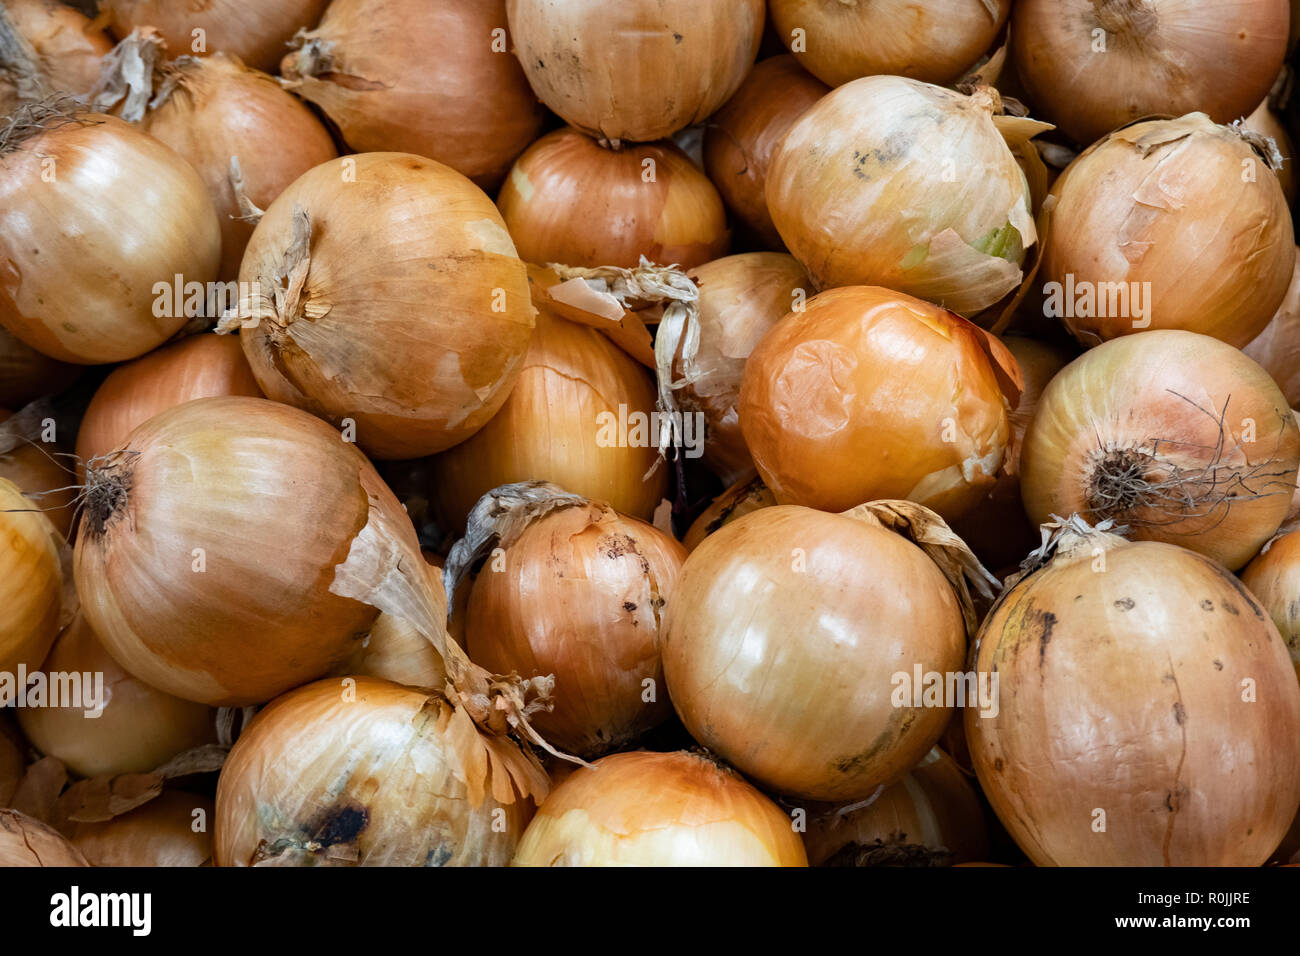 A display of fresh white or sweet onions, Allium cepa, in a small grocery store in Speculator, NY USA Stock Photo